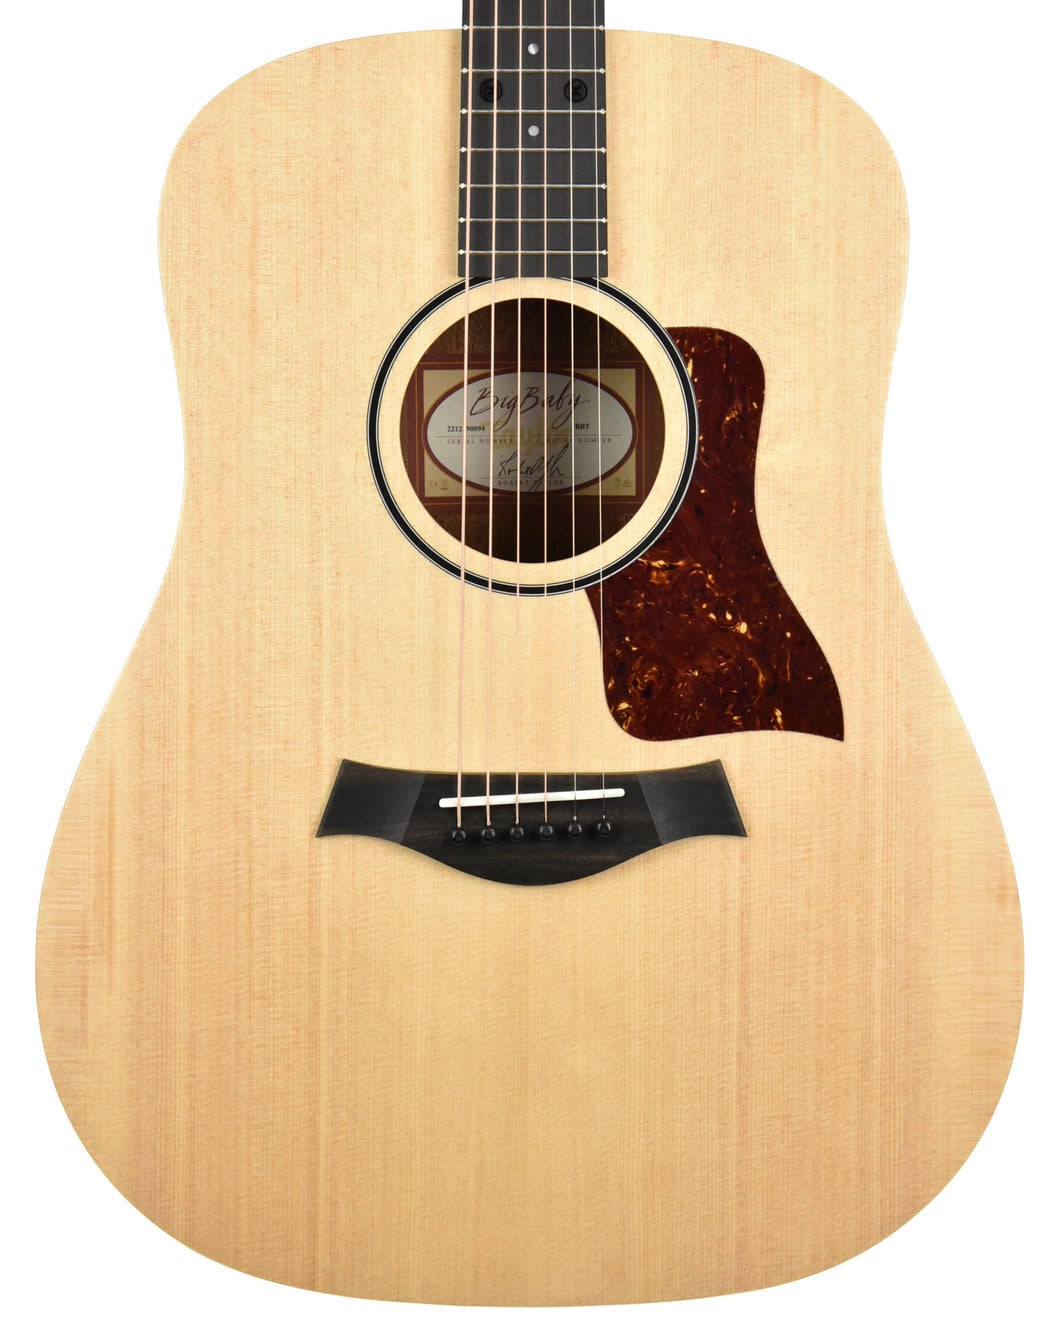 Taylor Big Baby BBT Acoustic Guitar in Natural 2212190094 - The Music Gallery